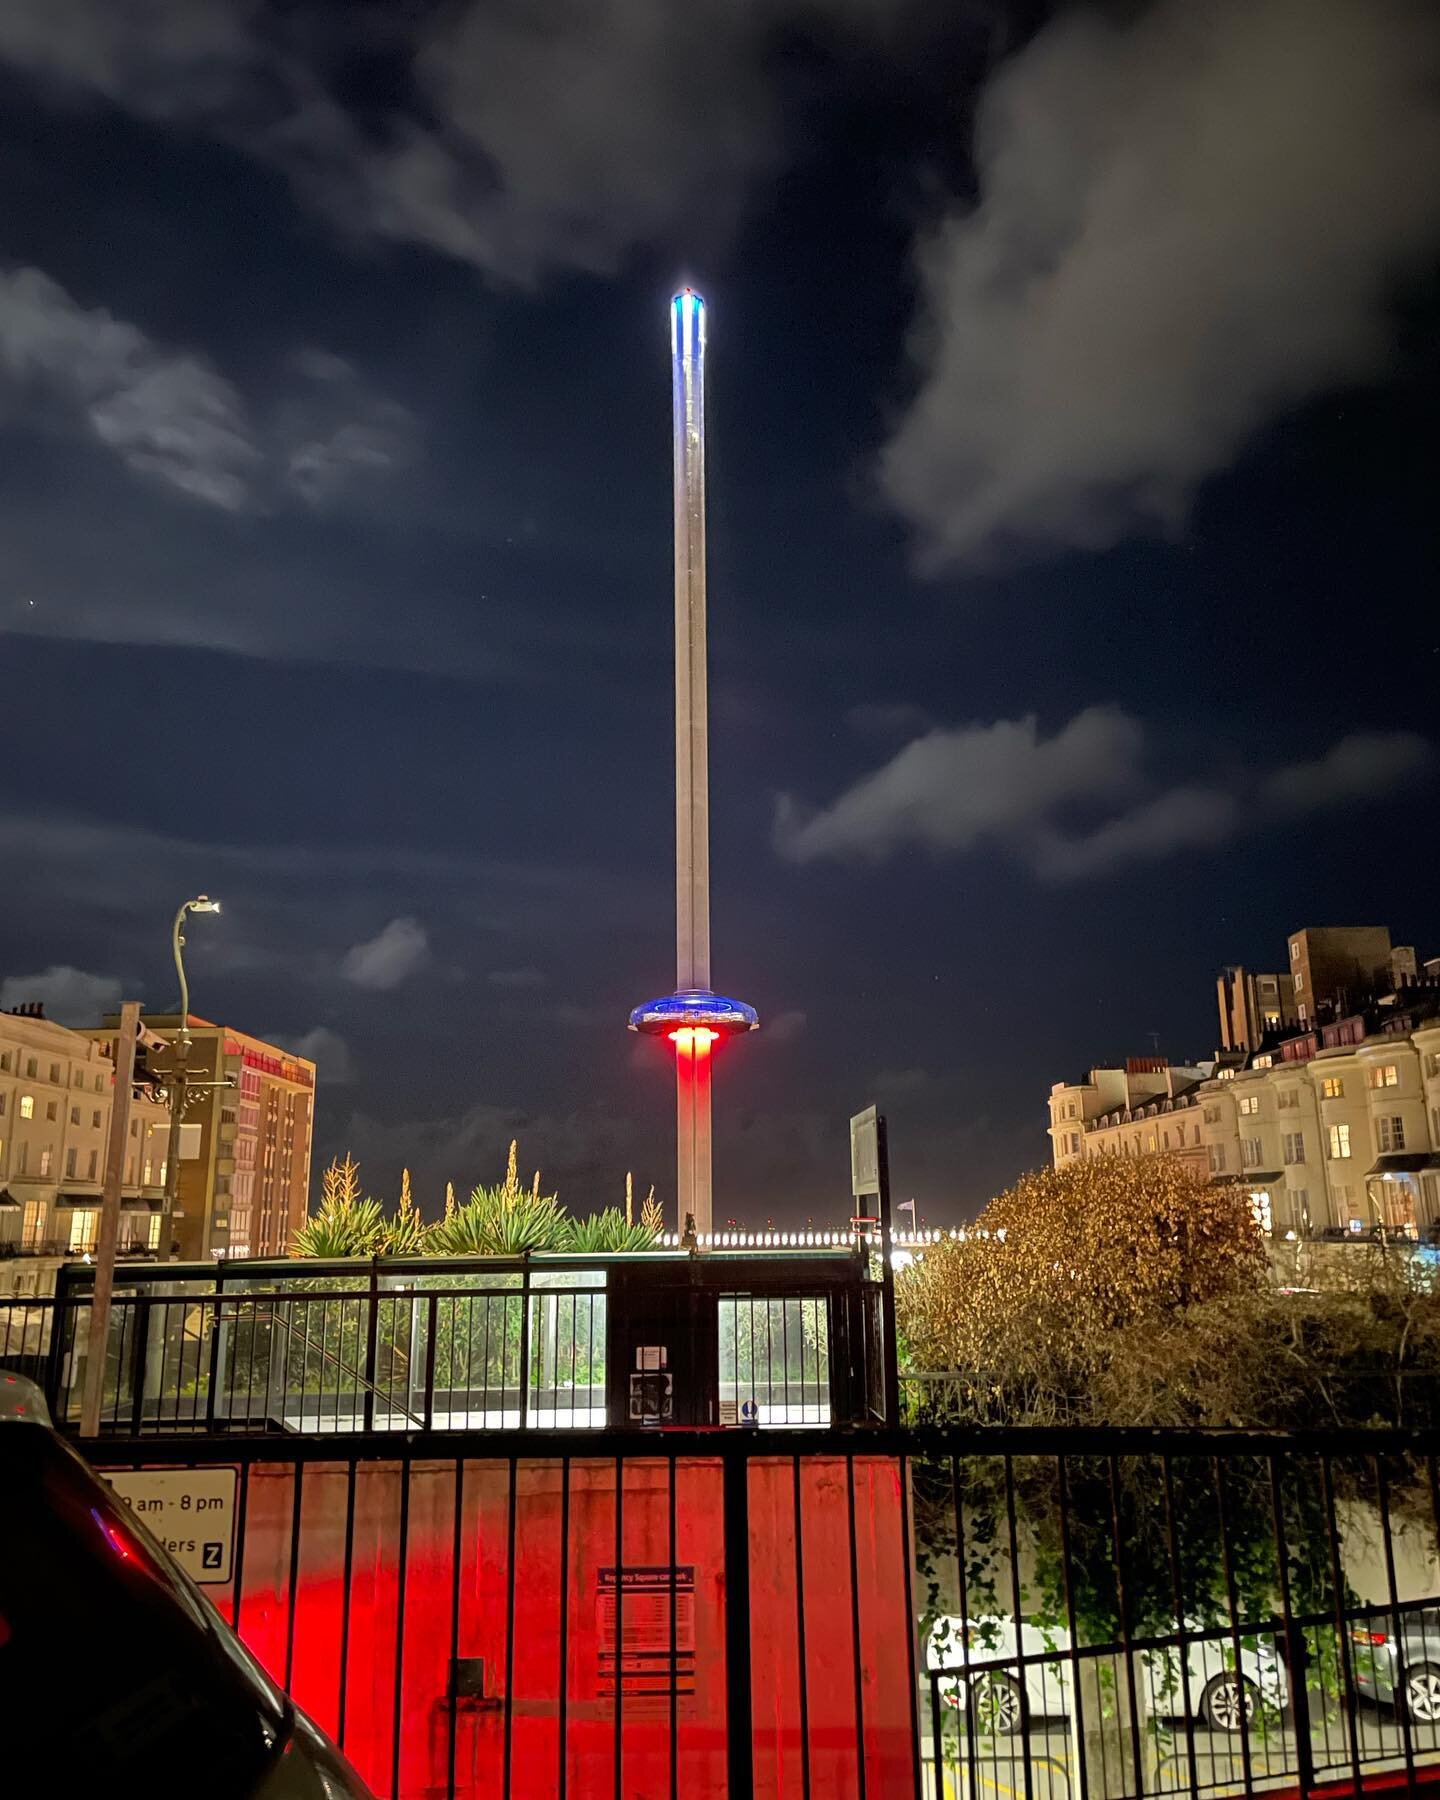 The i360 looking spectacular.  On the way home after a marvellous evening at Bincho Yakitori. Celebrating BG&rsquo;s birthday with @suzie.kelly.127 #i360brighton #brightonbeach #nightskyphotography